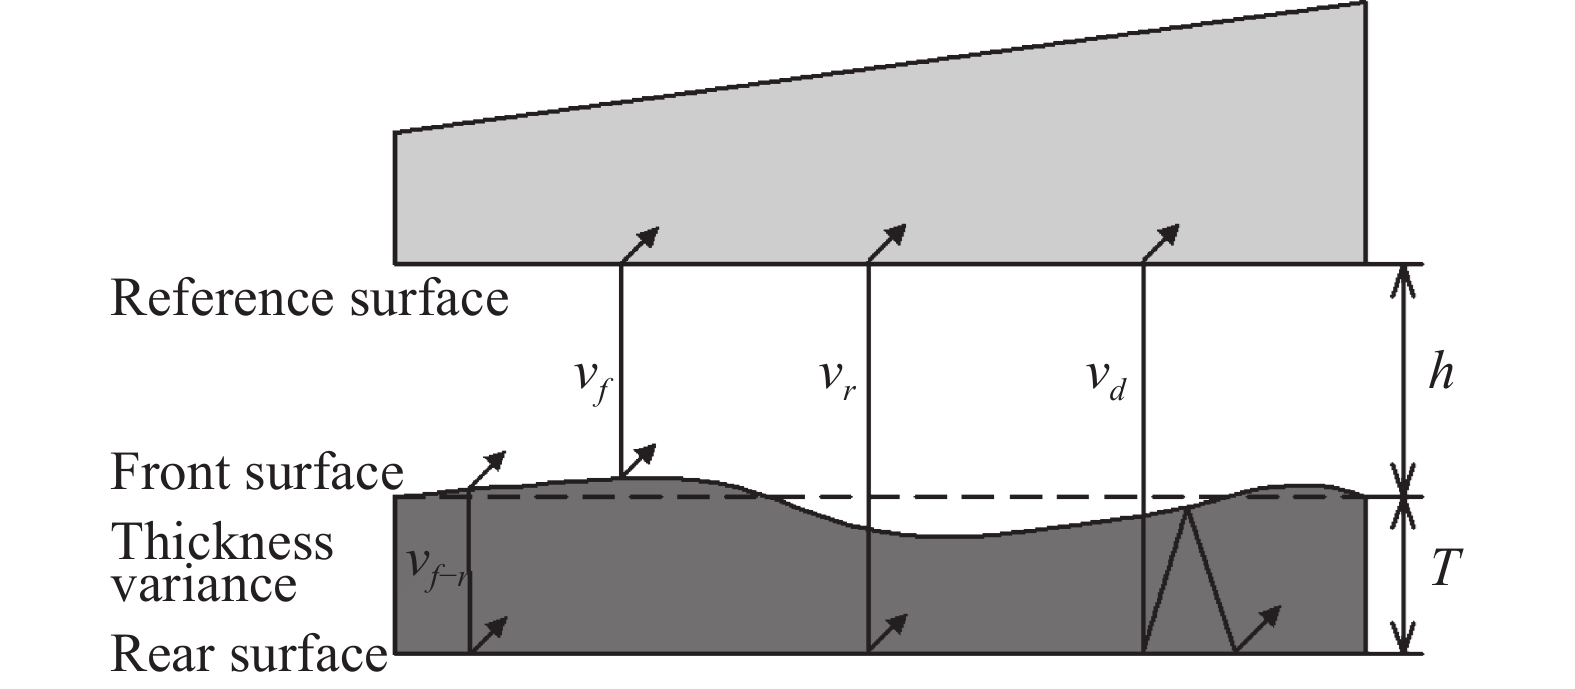 Reflection path diagram of interference beam